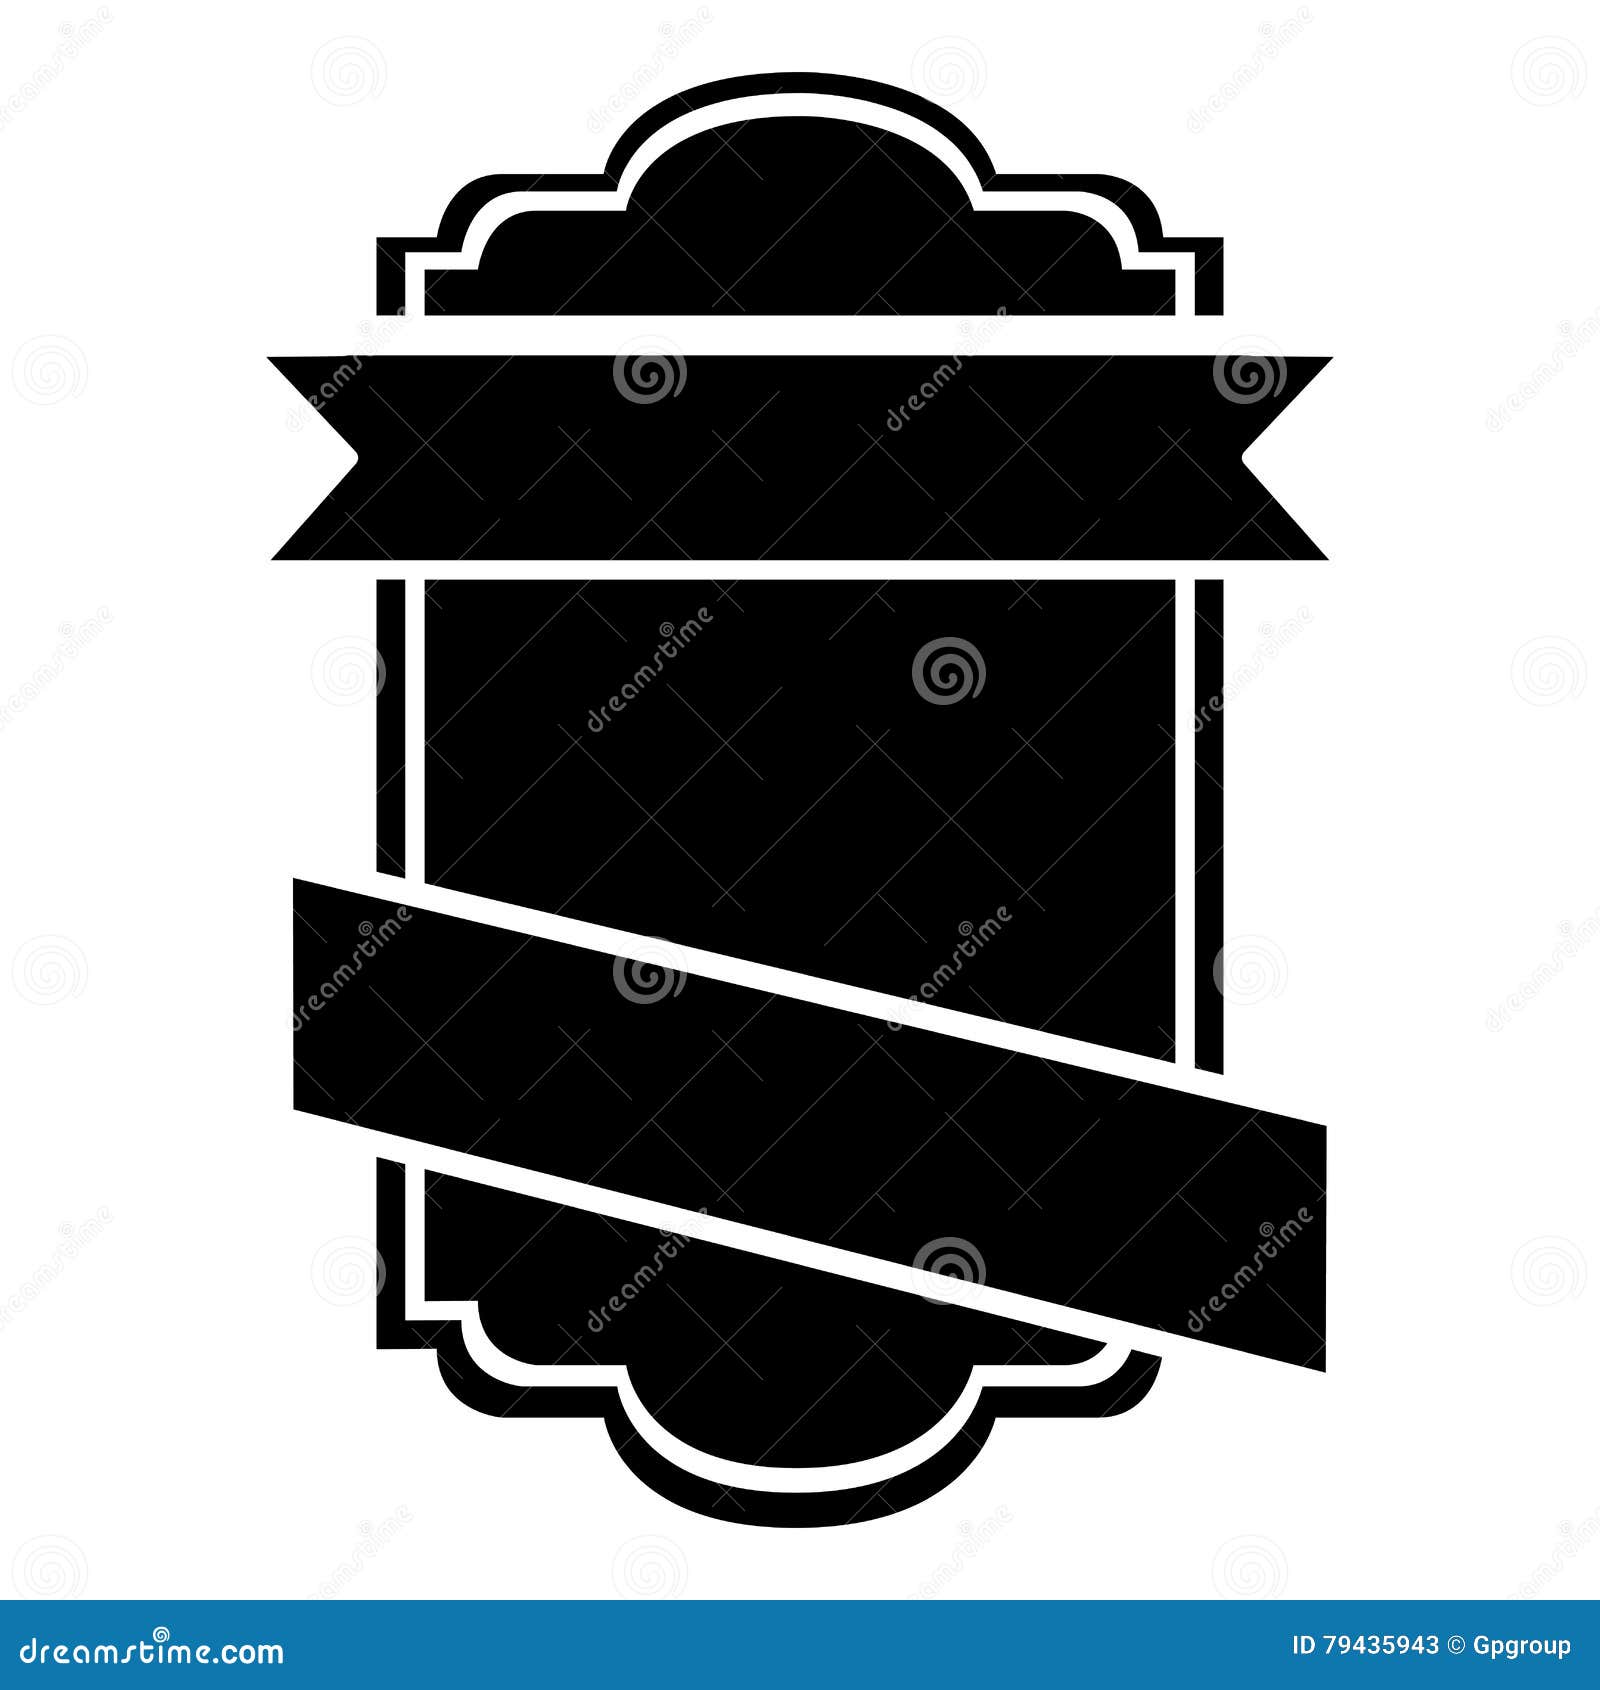 Emblem or label icon image stock vector. Illustration of ornament ...